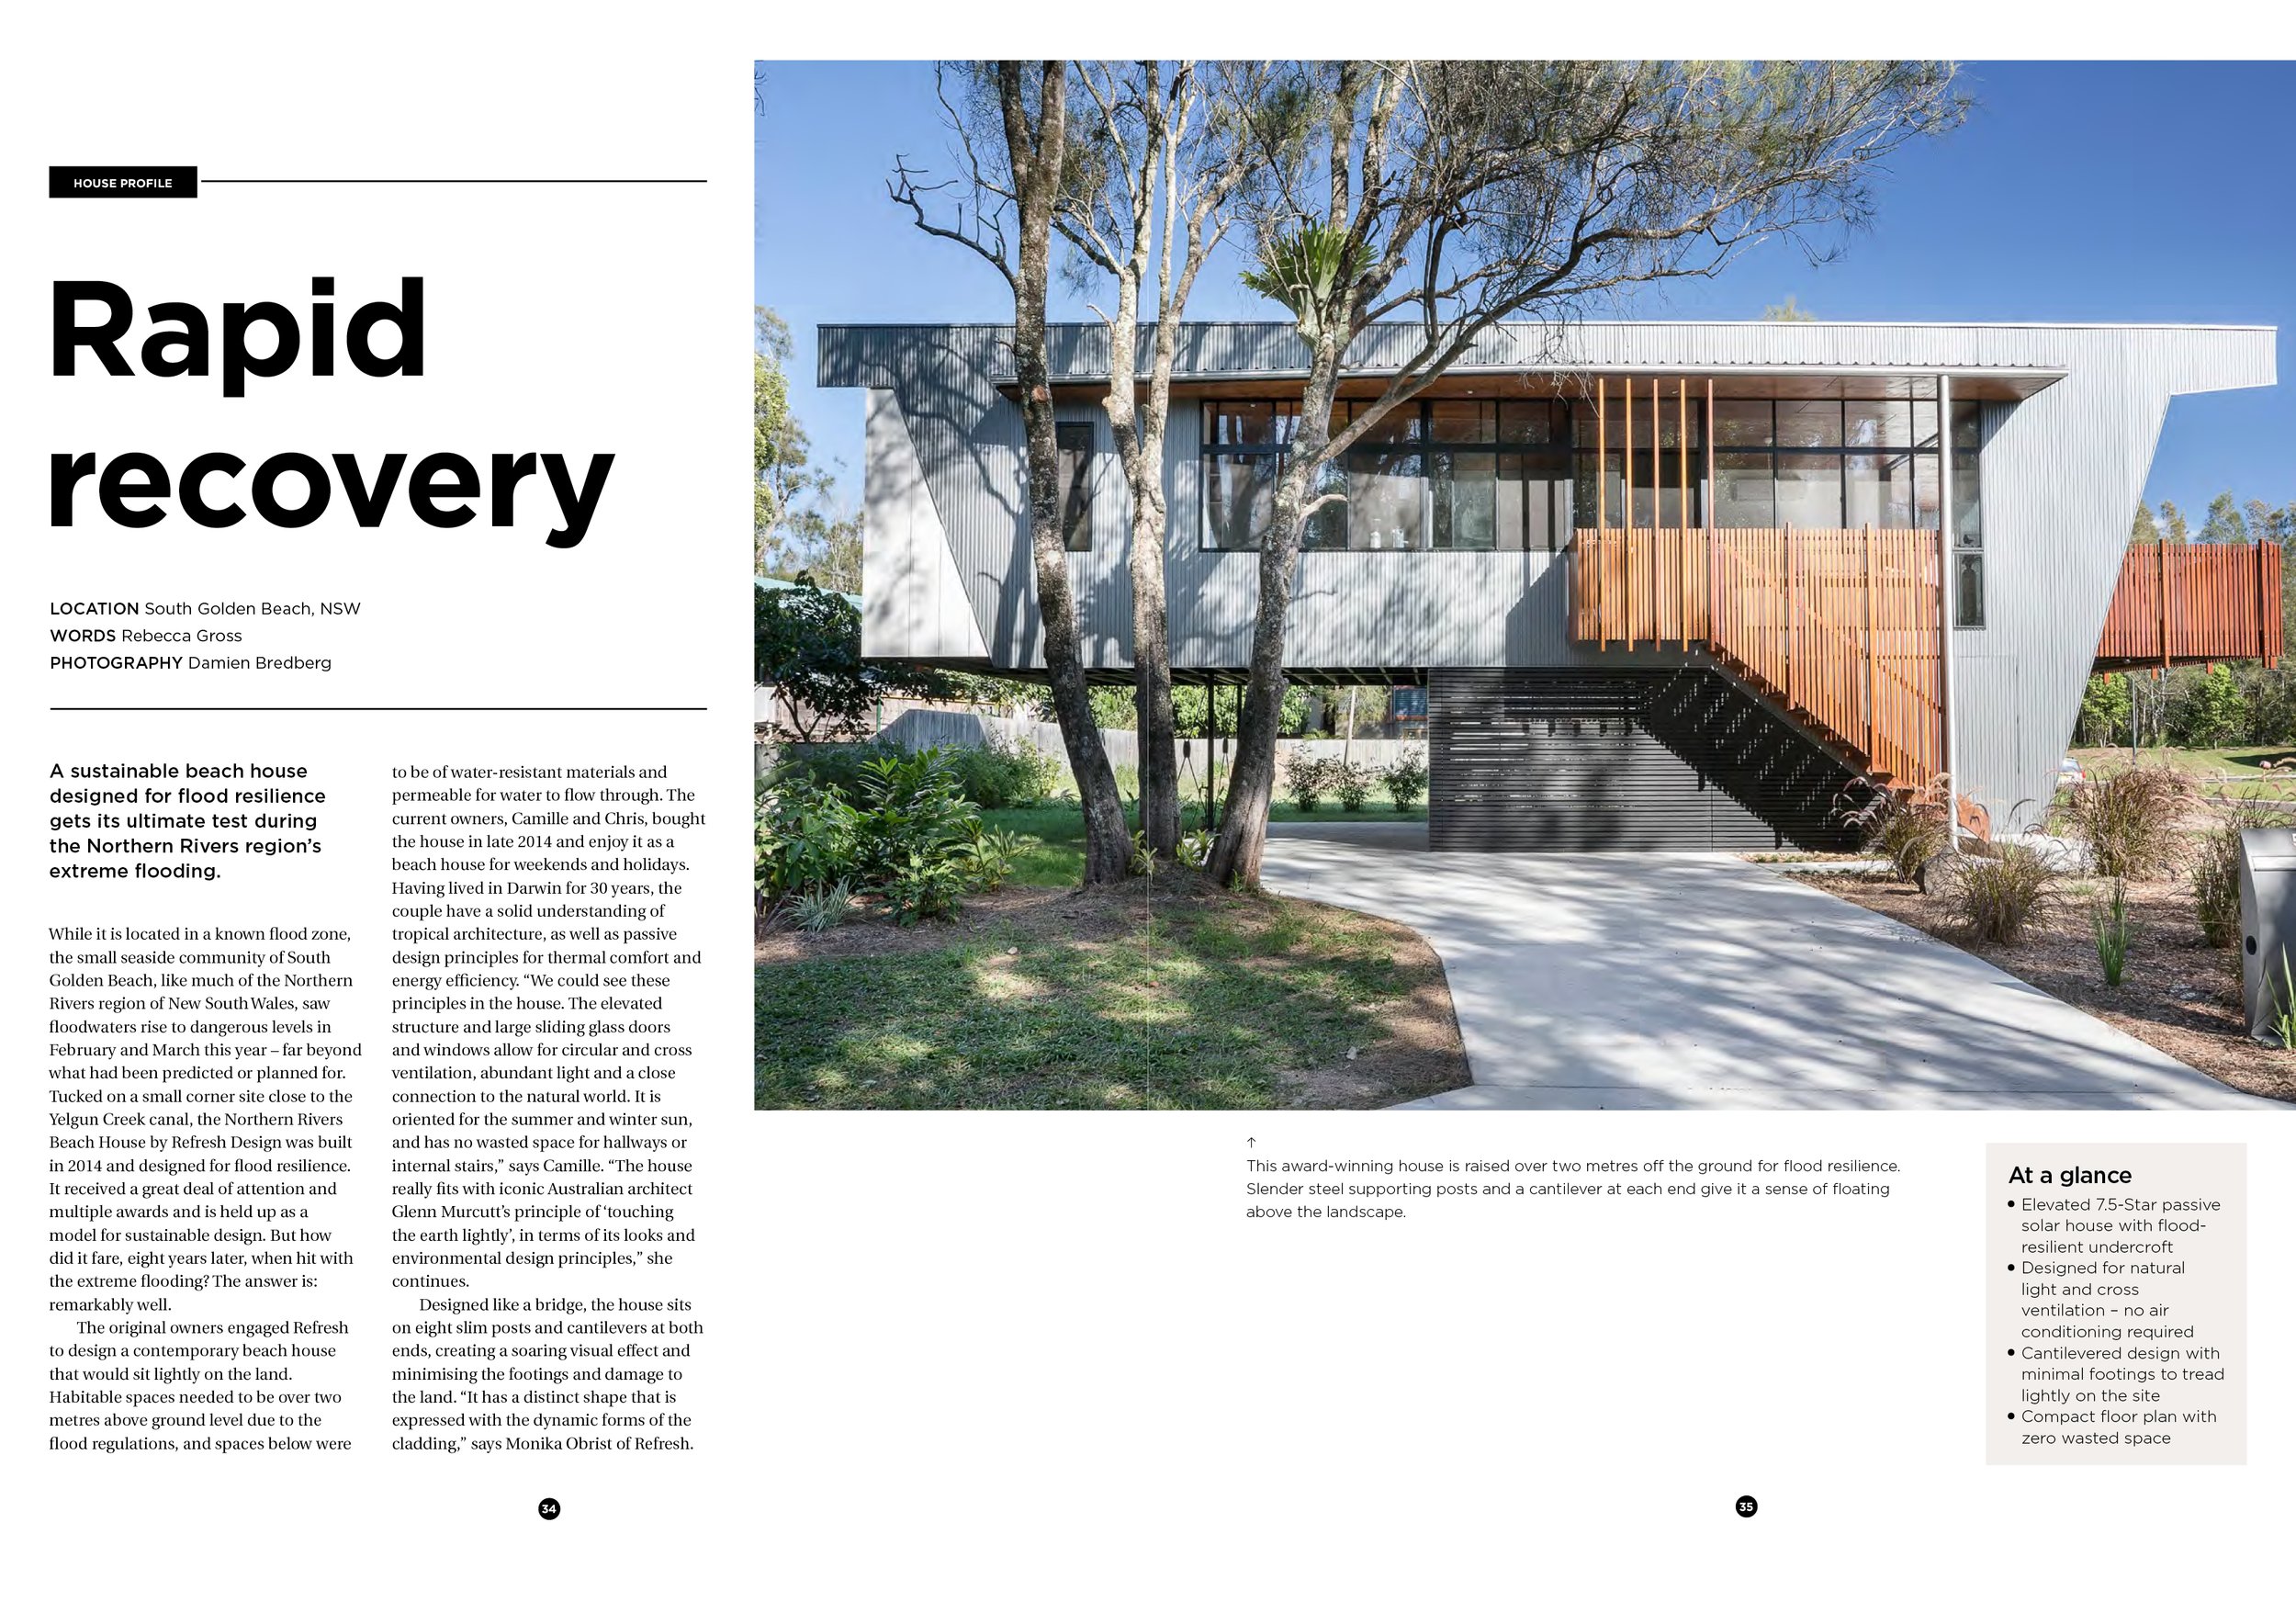 Sanctuary Issue 60_Northern Rivers Beach House_1.jpg